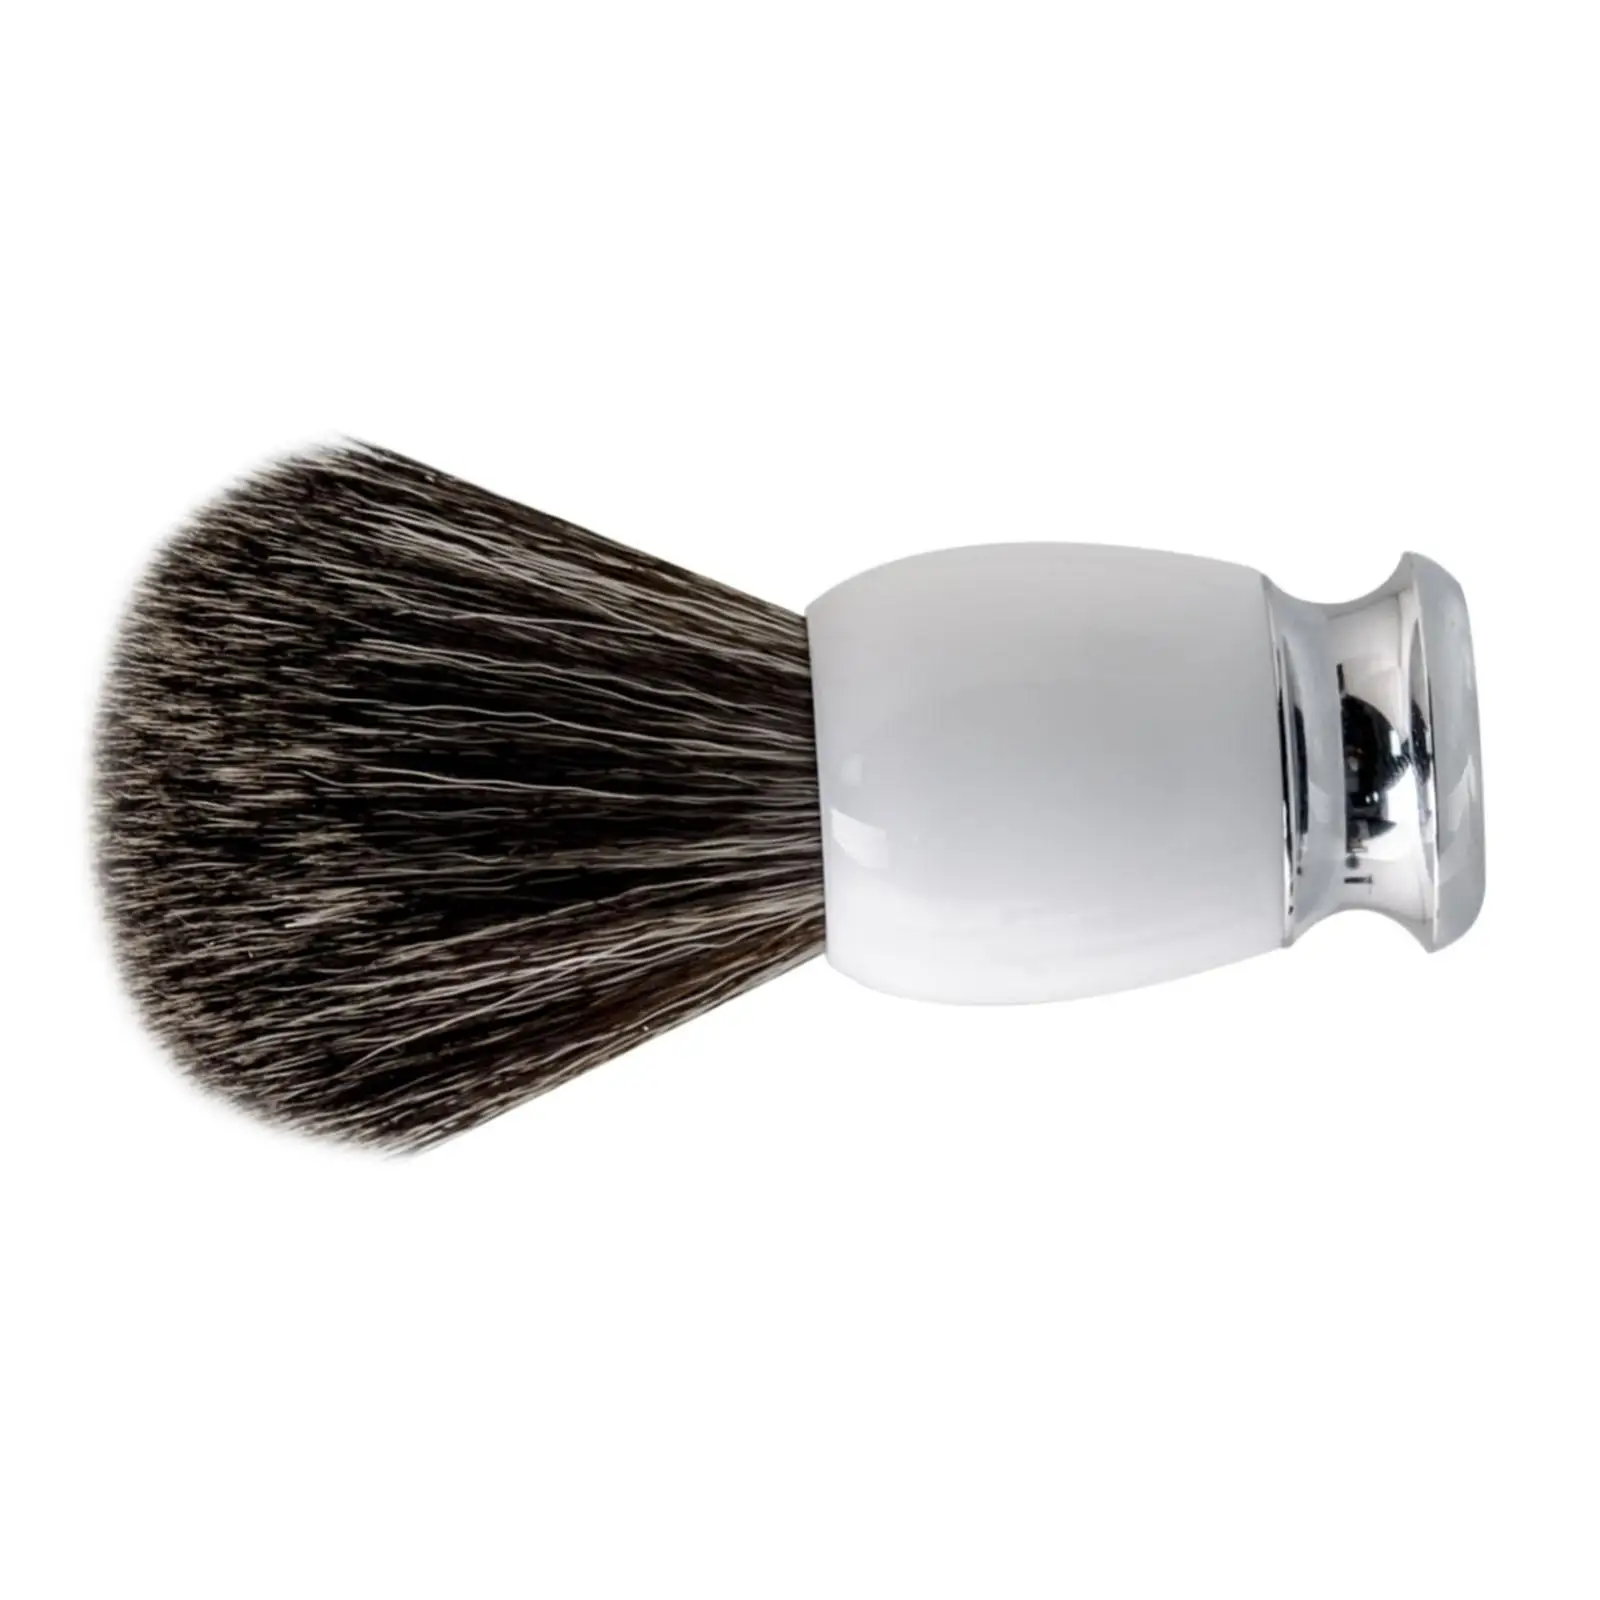 Hair Shaving Brush Beard Brush Grooming Rich Lather Extremely Smooth Plush on Skin Father`s Day Gifts Luxury Shaving Cream Brush